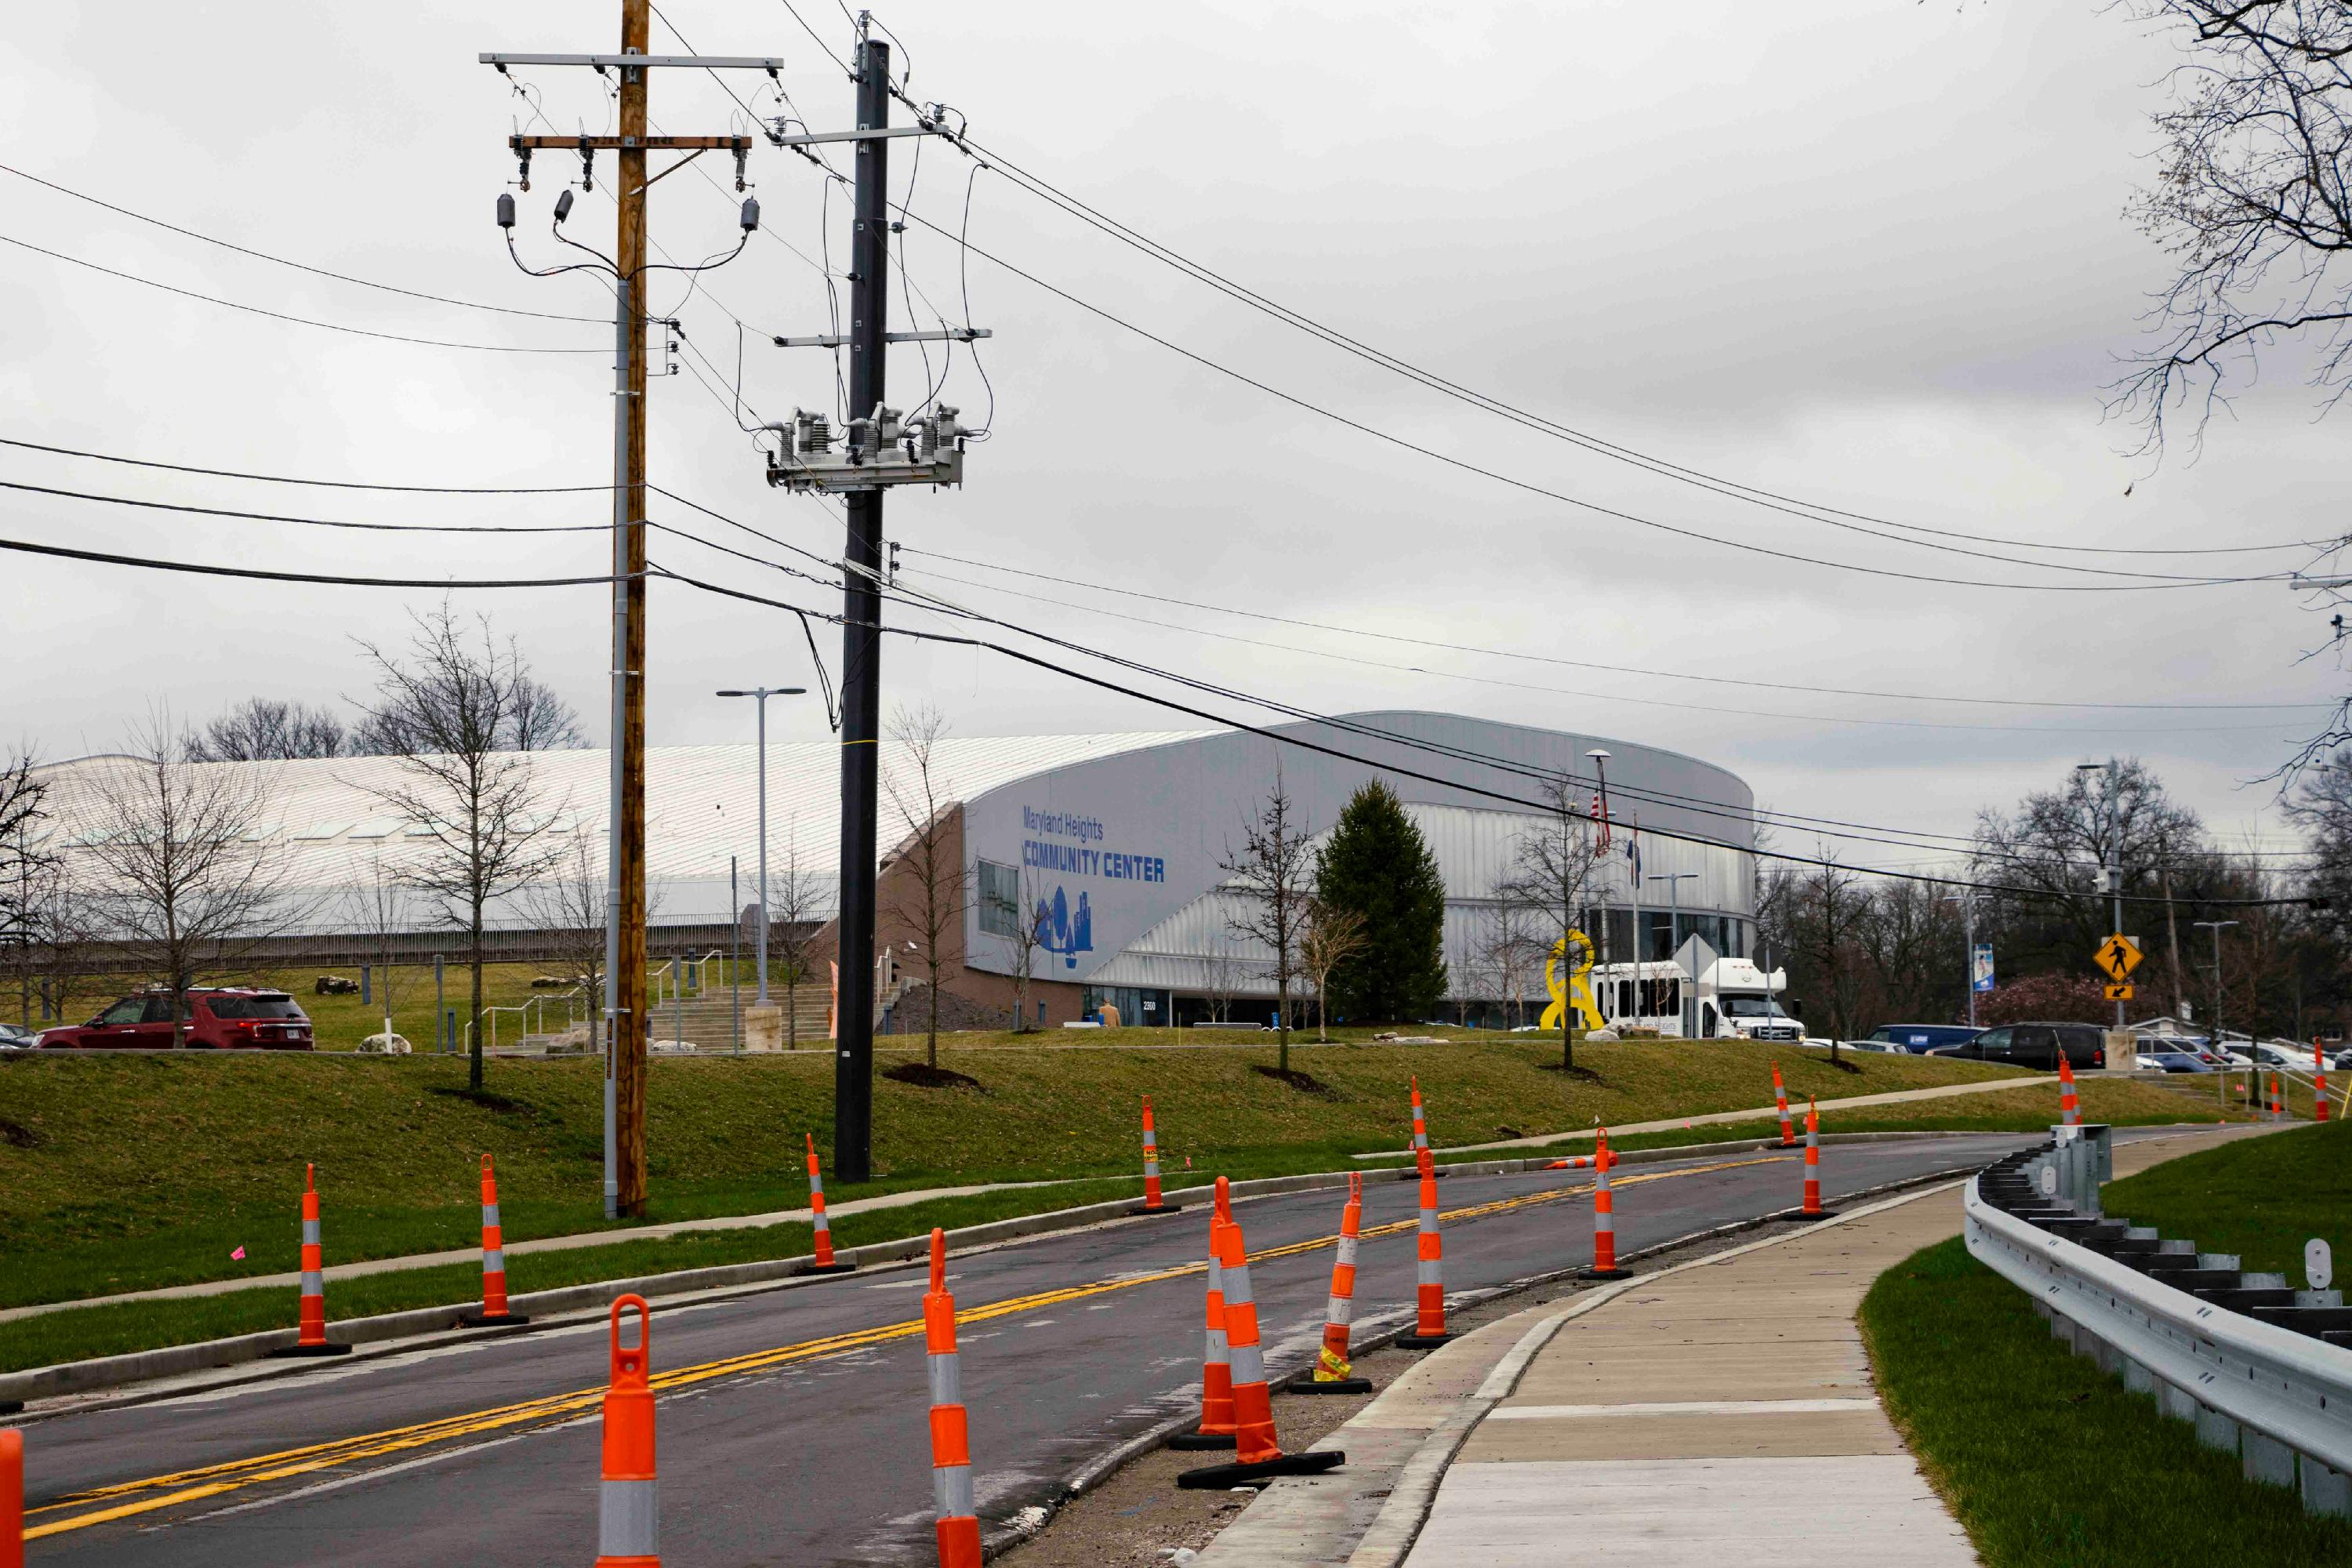 A photo taken on the sidewalk of McKelvey Road shows many traffic cones, with the Maryland Heights Community Center in the background on a cloudy day